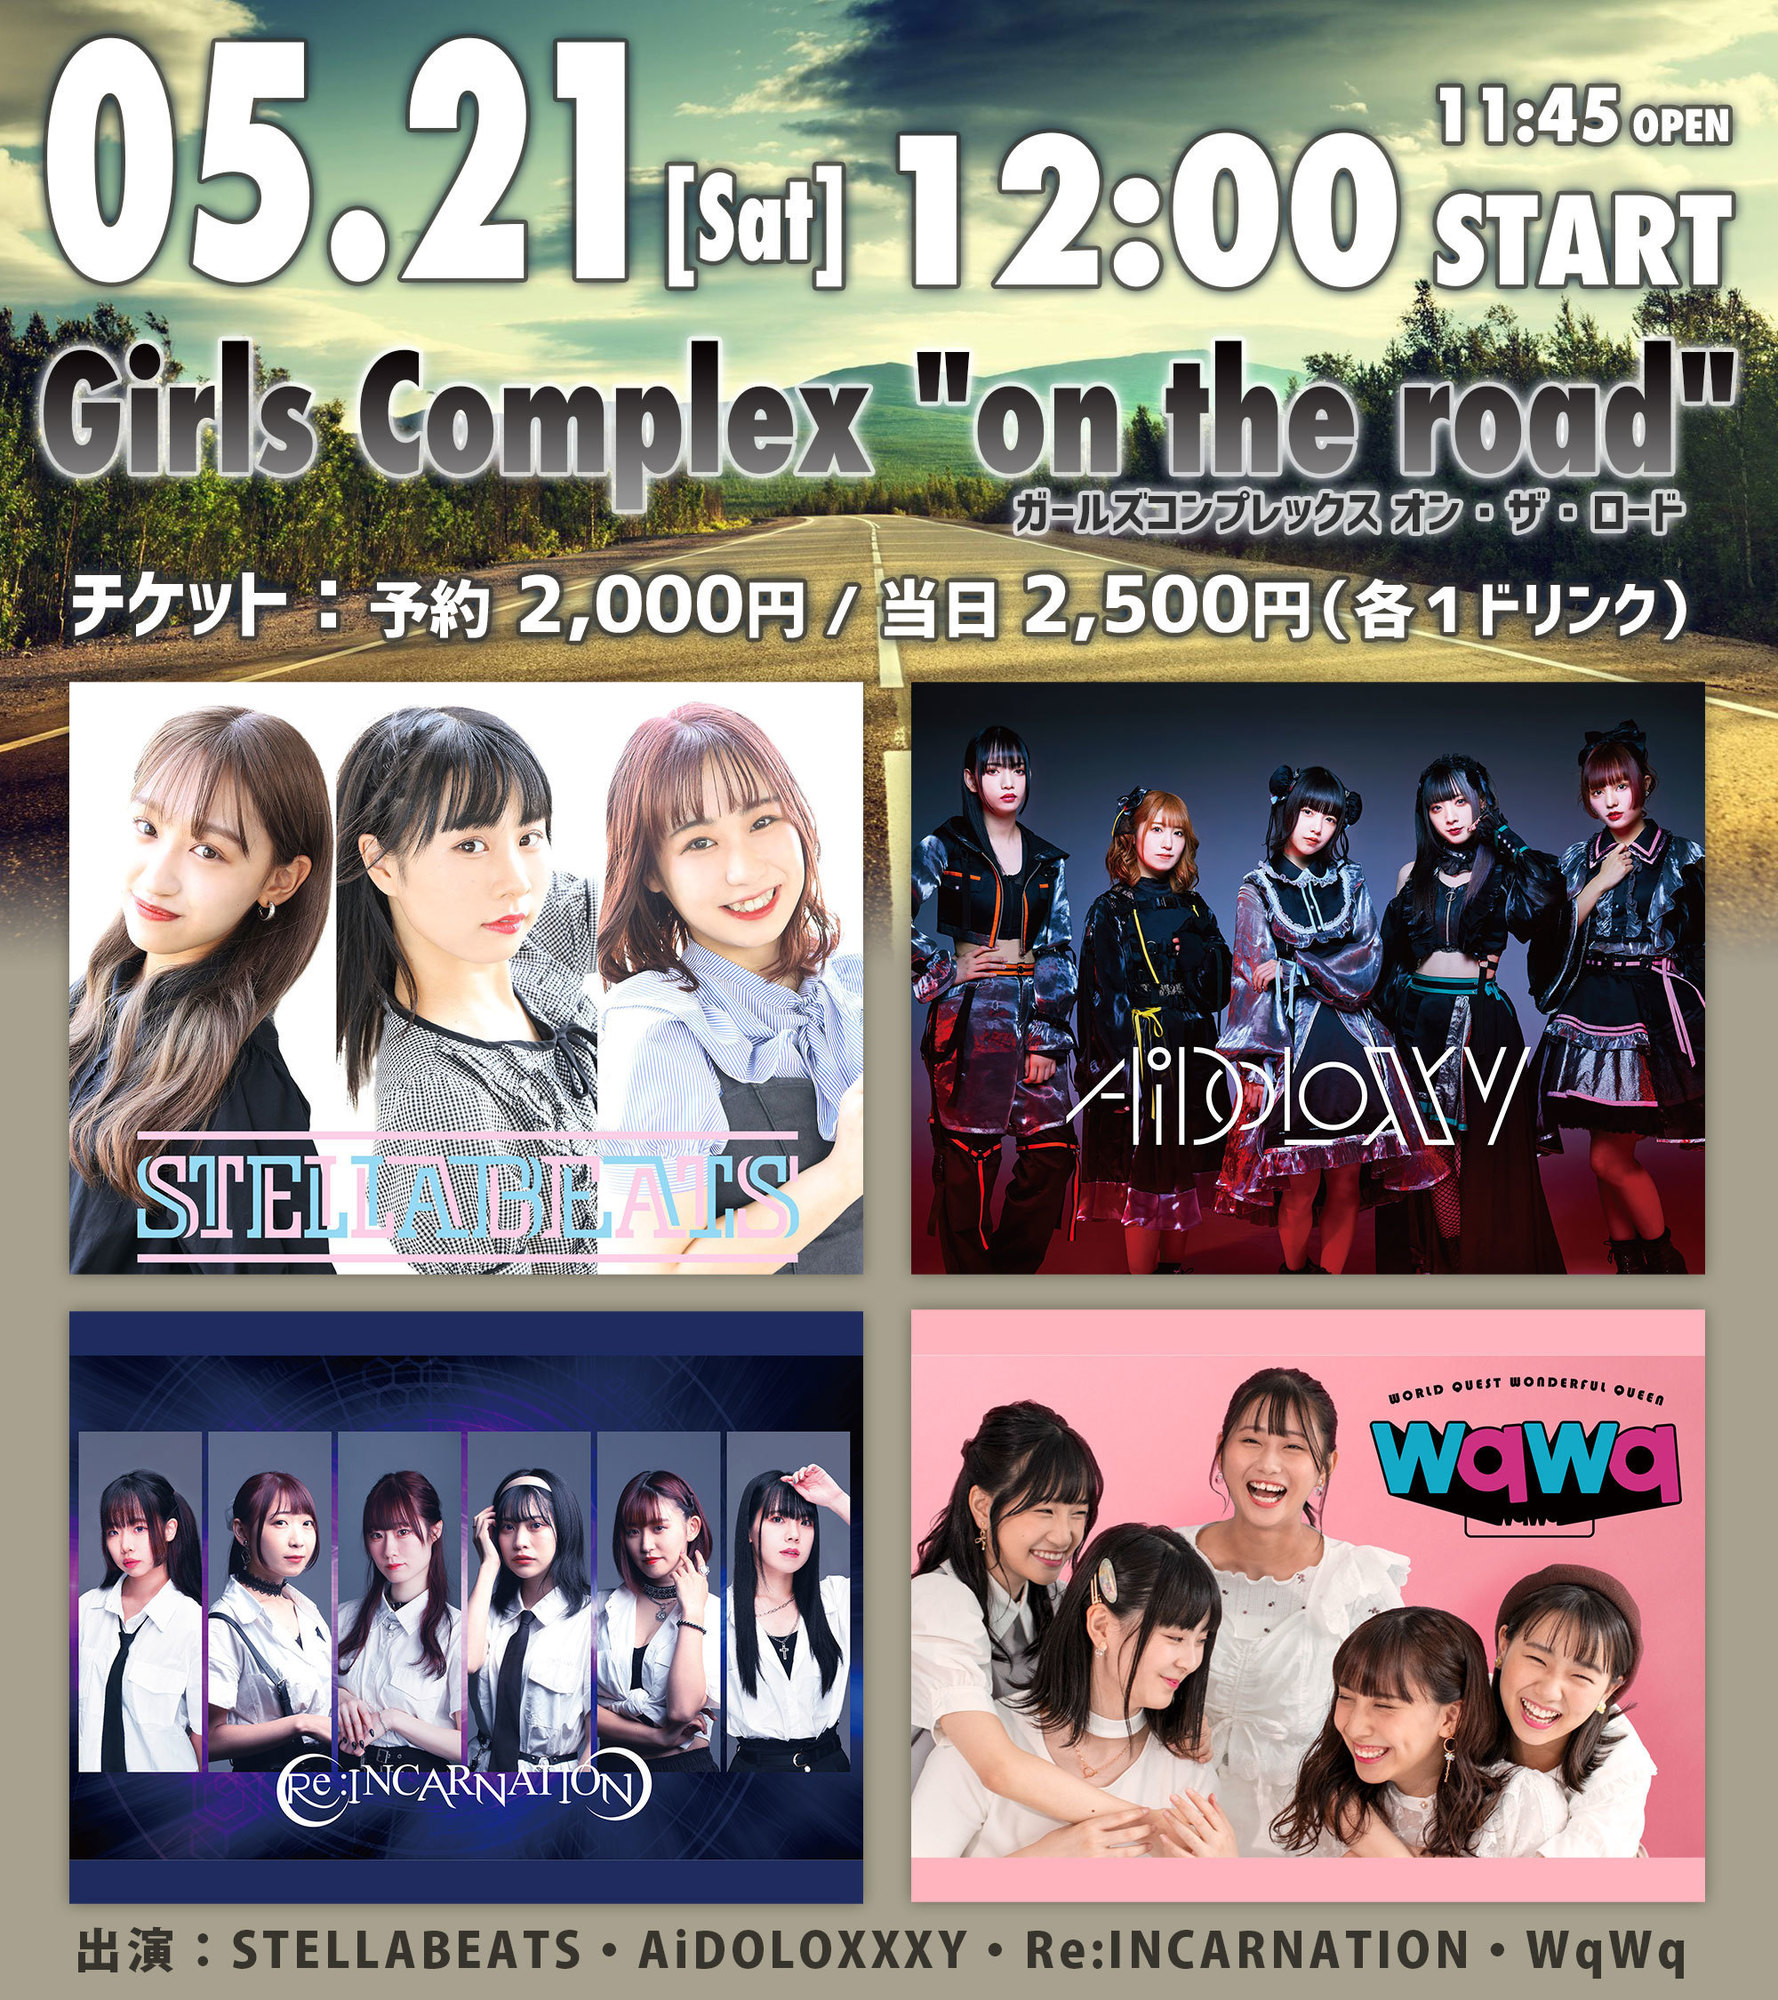 Girls Complex "on the road"